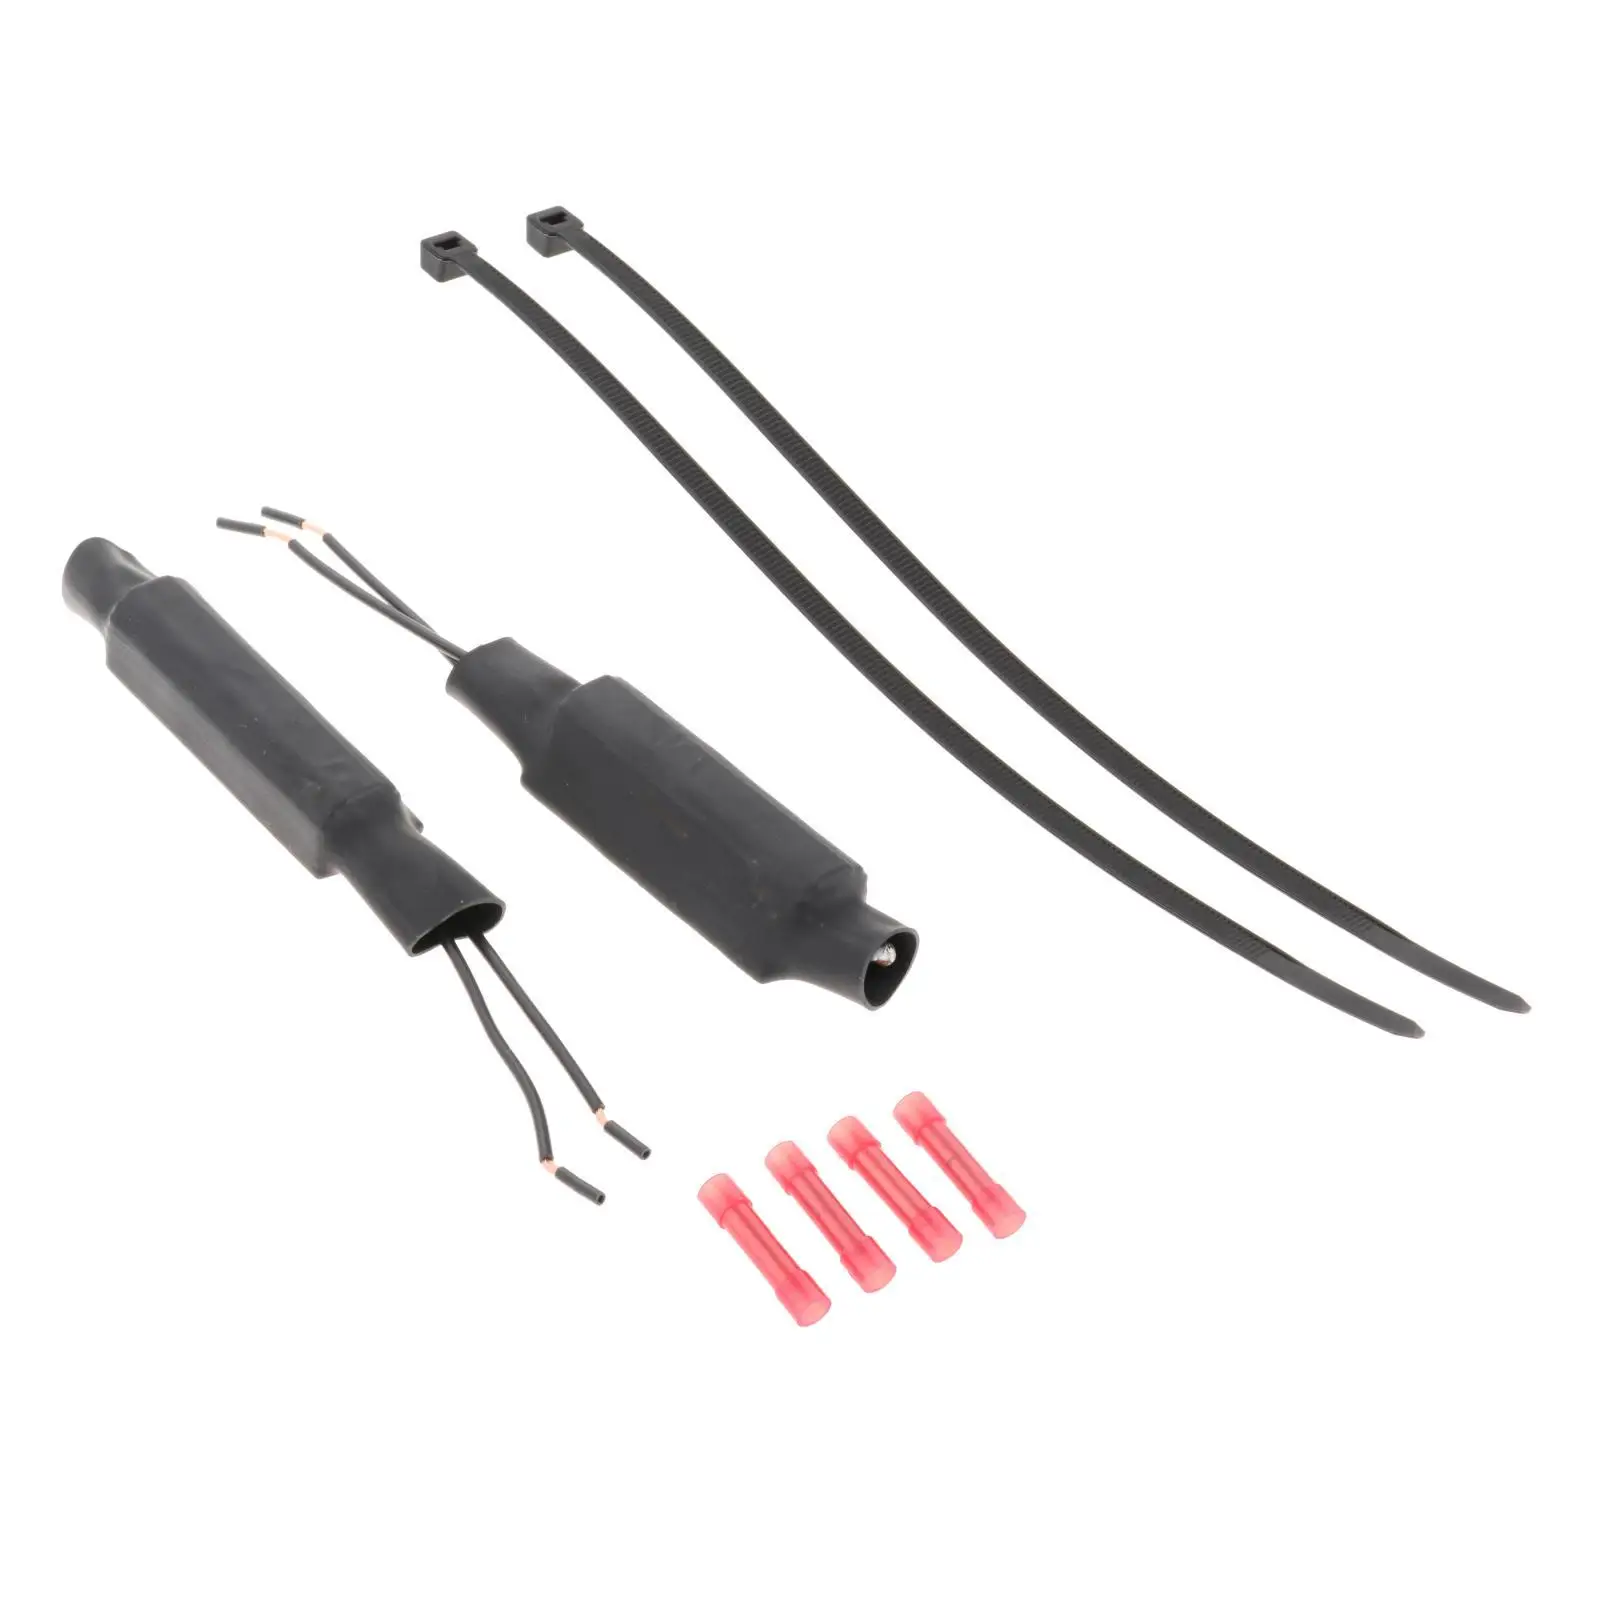 Car Strut Bypass Kit Supplies Premium Quality Easy to Use Plastic Struts Mount Kit for Cadillac F55 F95 13-2019 Accessories